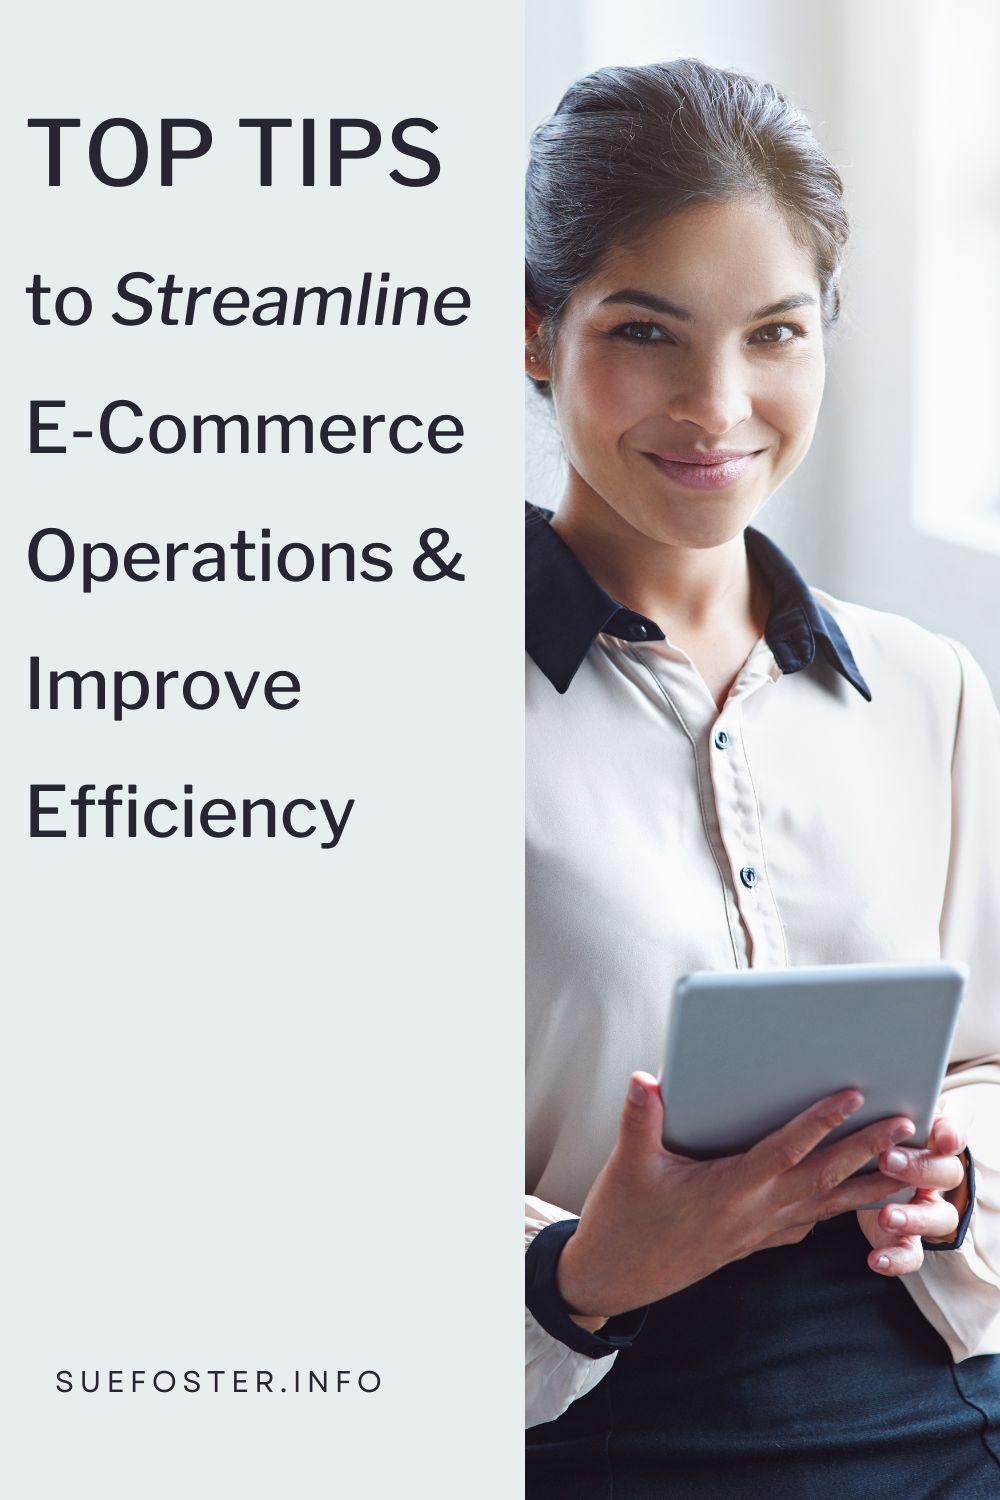 Tips to help you streamline e-commerce operations and improve efficiency.